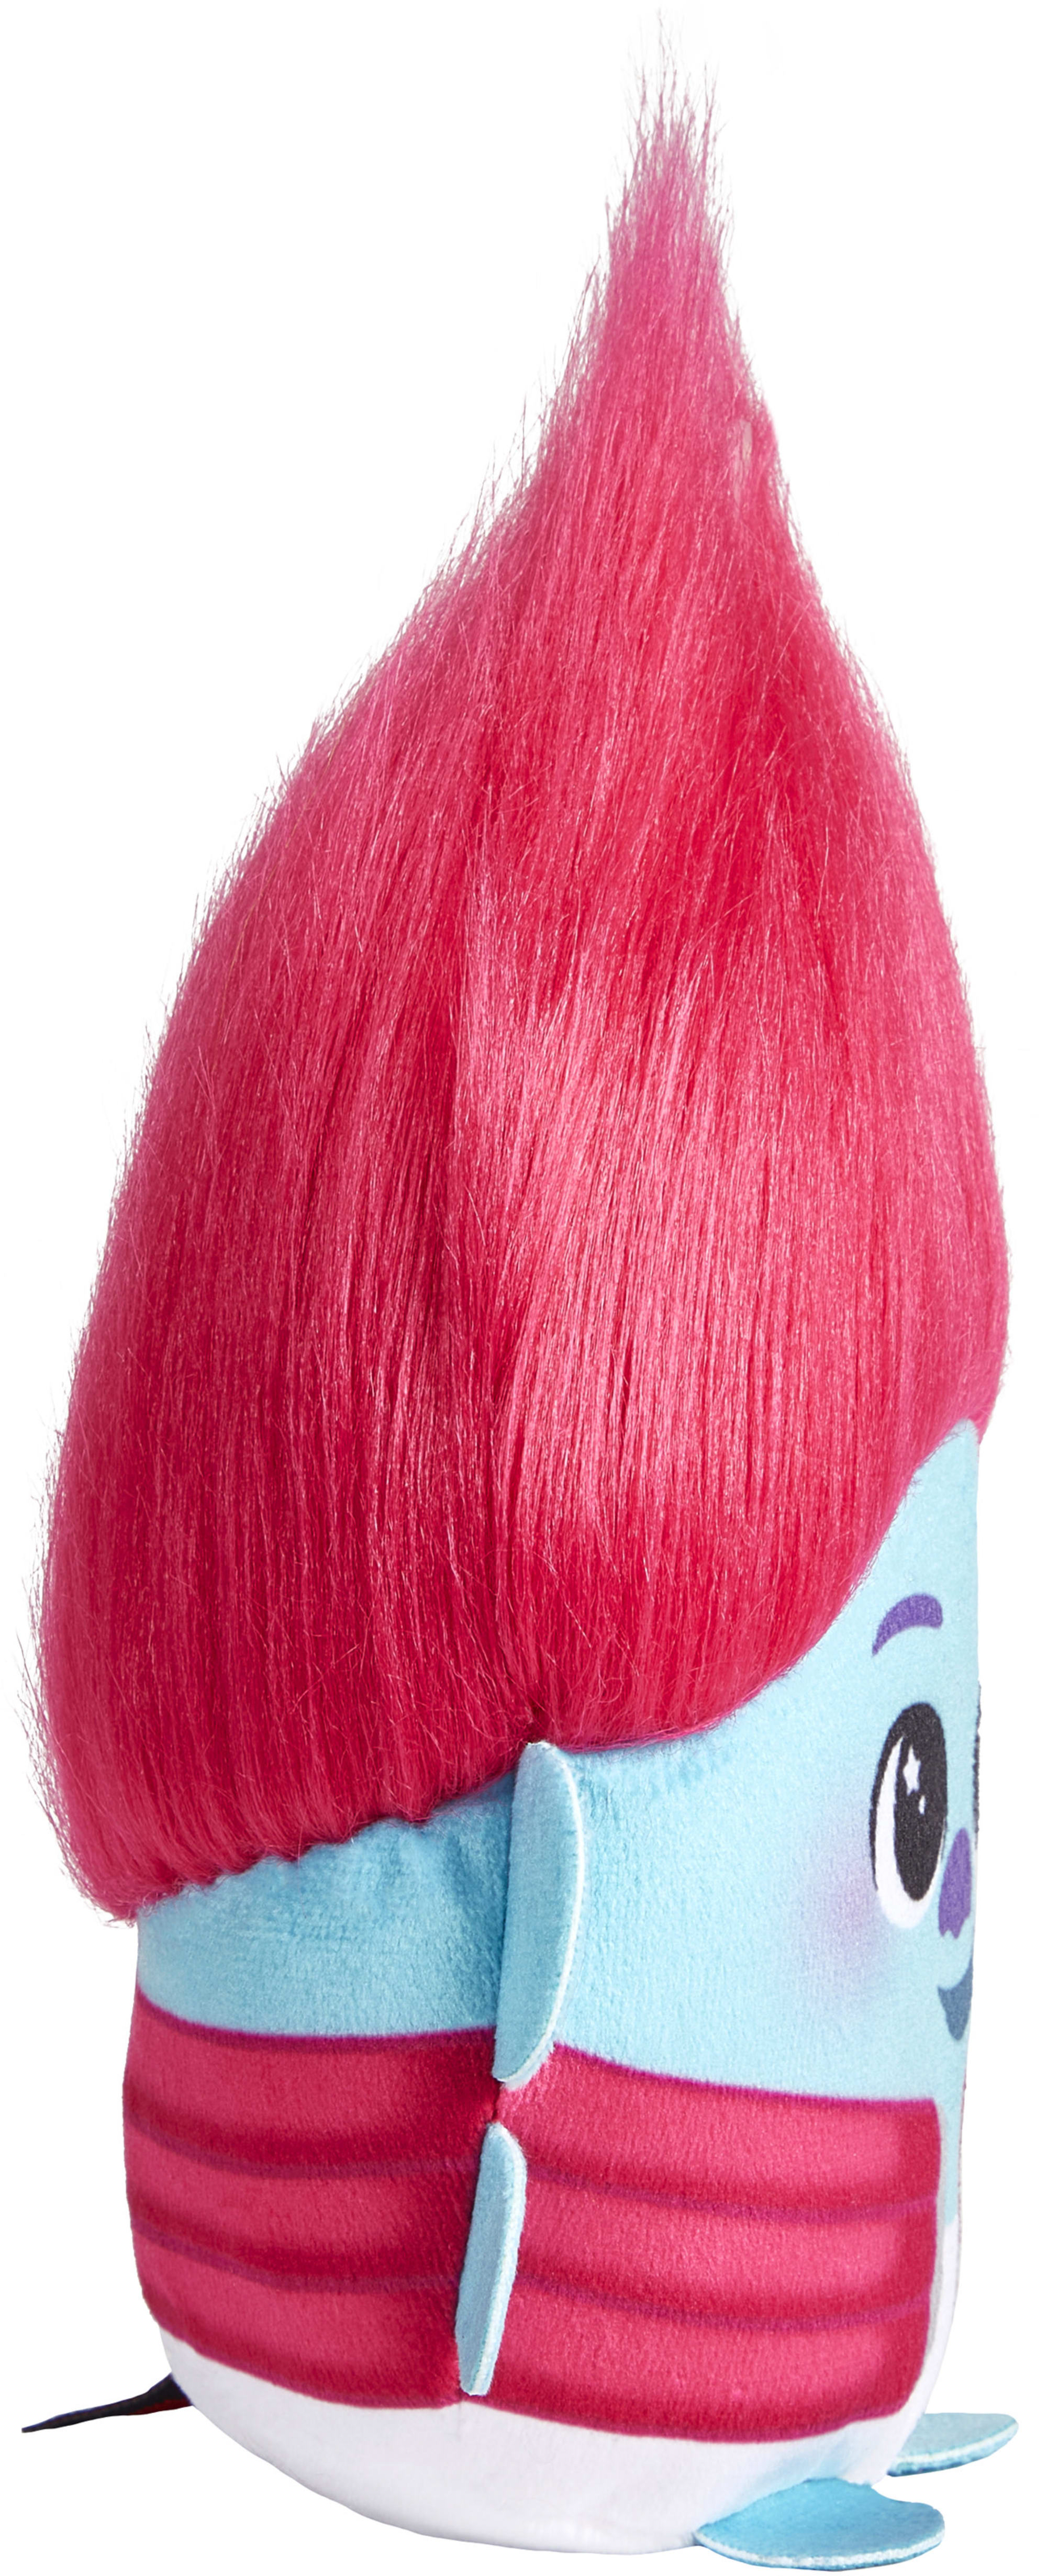 DreamWorks Trolls Band Together Hairmony Mixers™ Plush Toys with